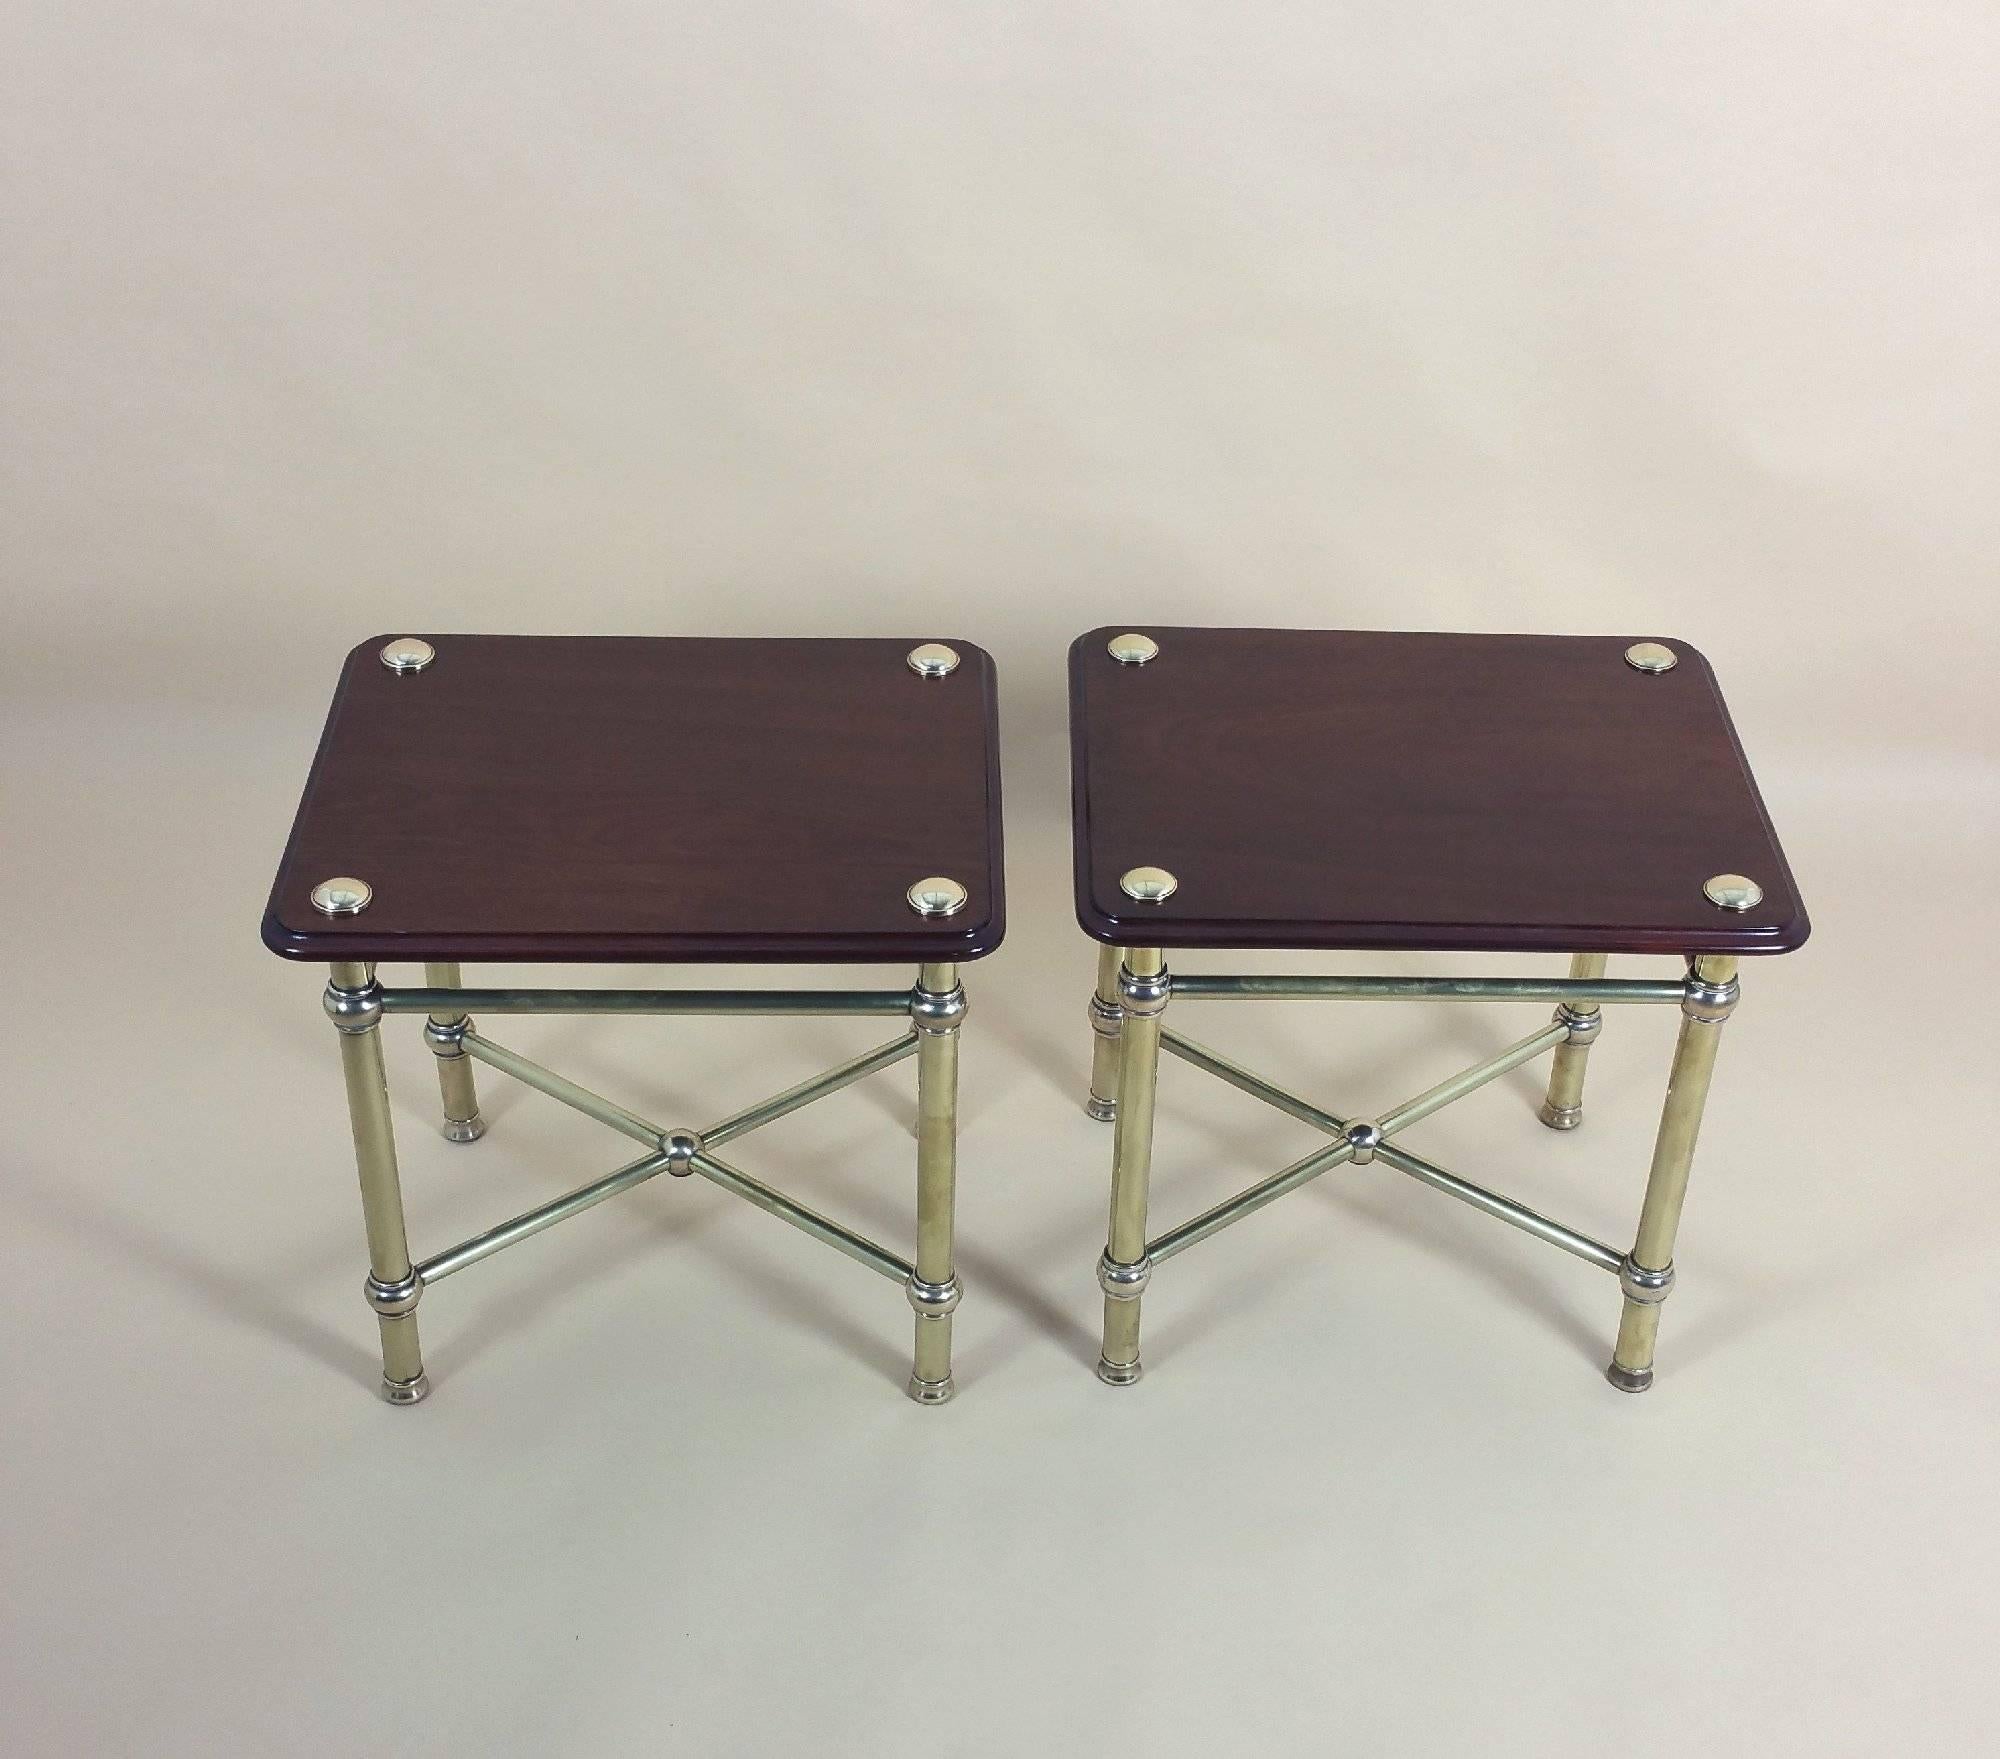 This very simple and classical style pair of low side tables are designed from a combination of mahogany and brass. Each table measures 21 ¼ in - 54 cm wide by 17 ¾ in – 45 cm deep, with a height of 20 ¼ in – 51.5 cm.